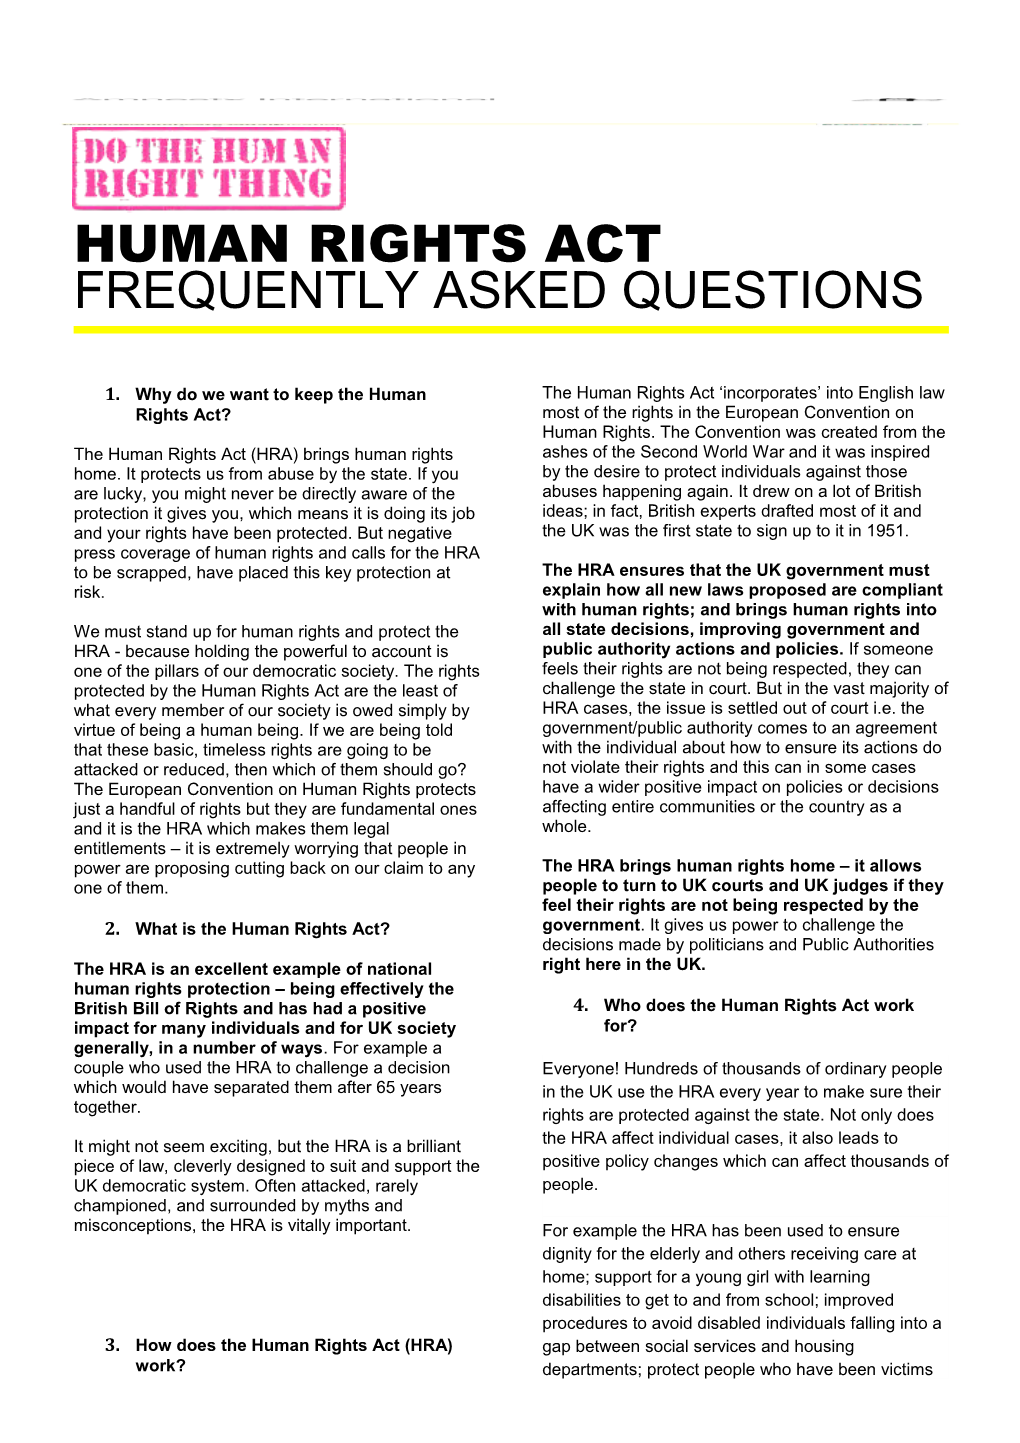 Human Rights Act: Frequently Asked Questions